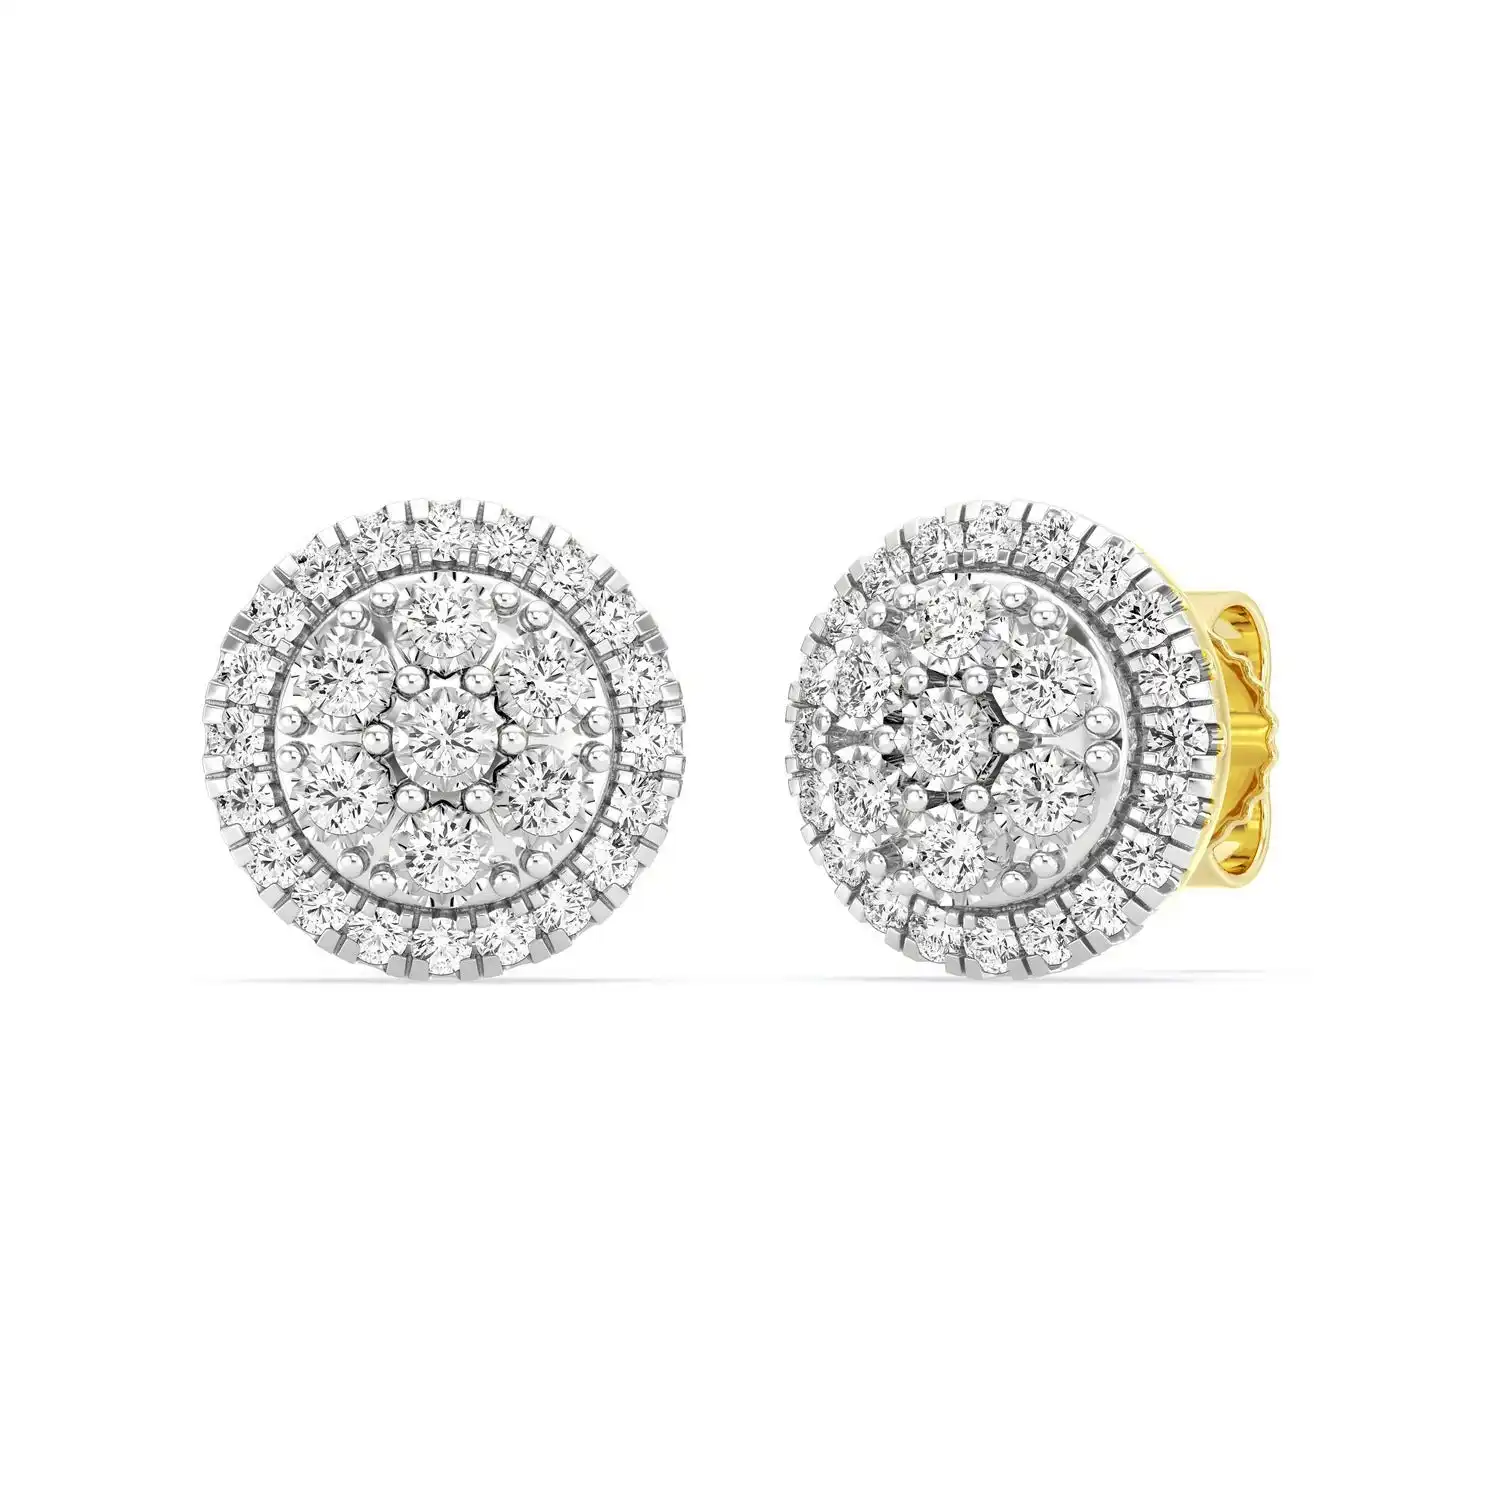 Round Miracle Halo Earrings with 1/2ct of Diamonds in 9ct Yellow Gold